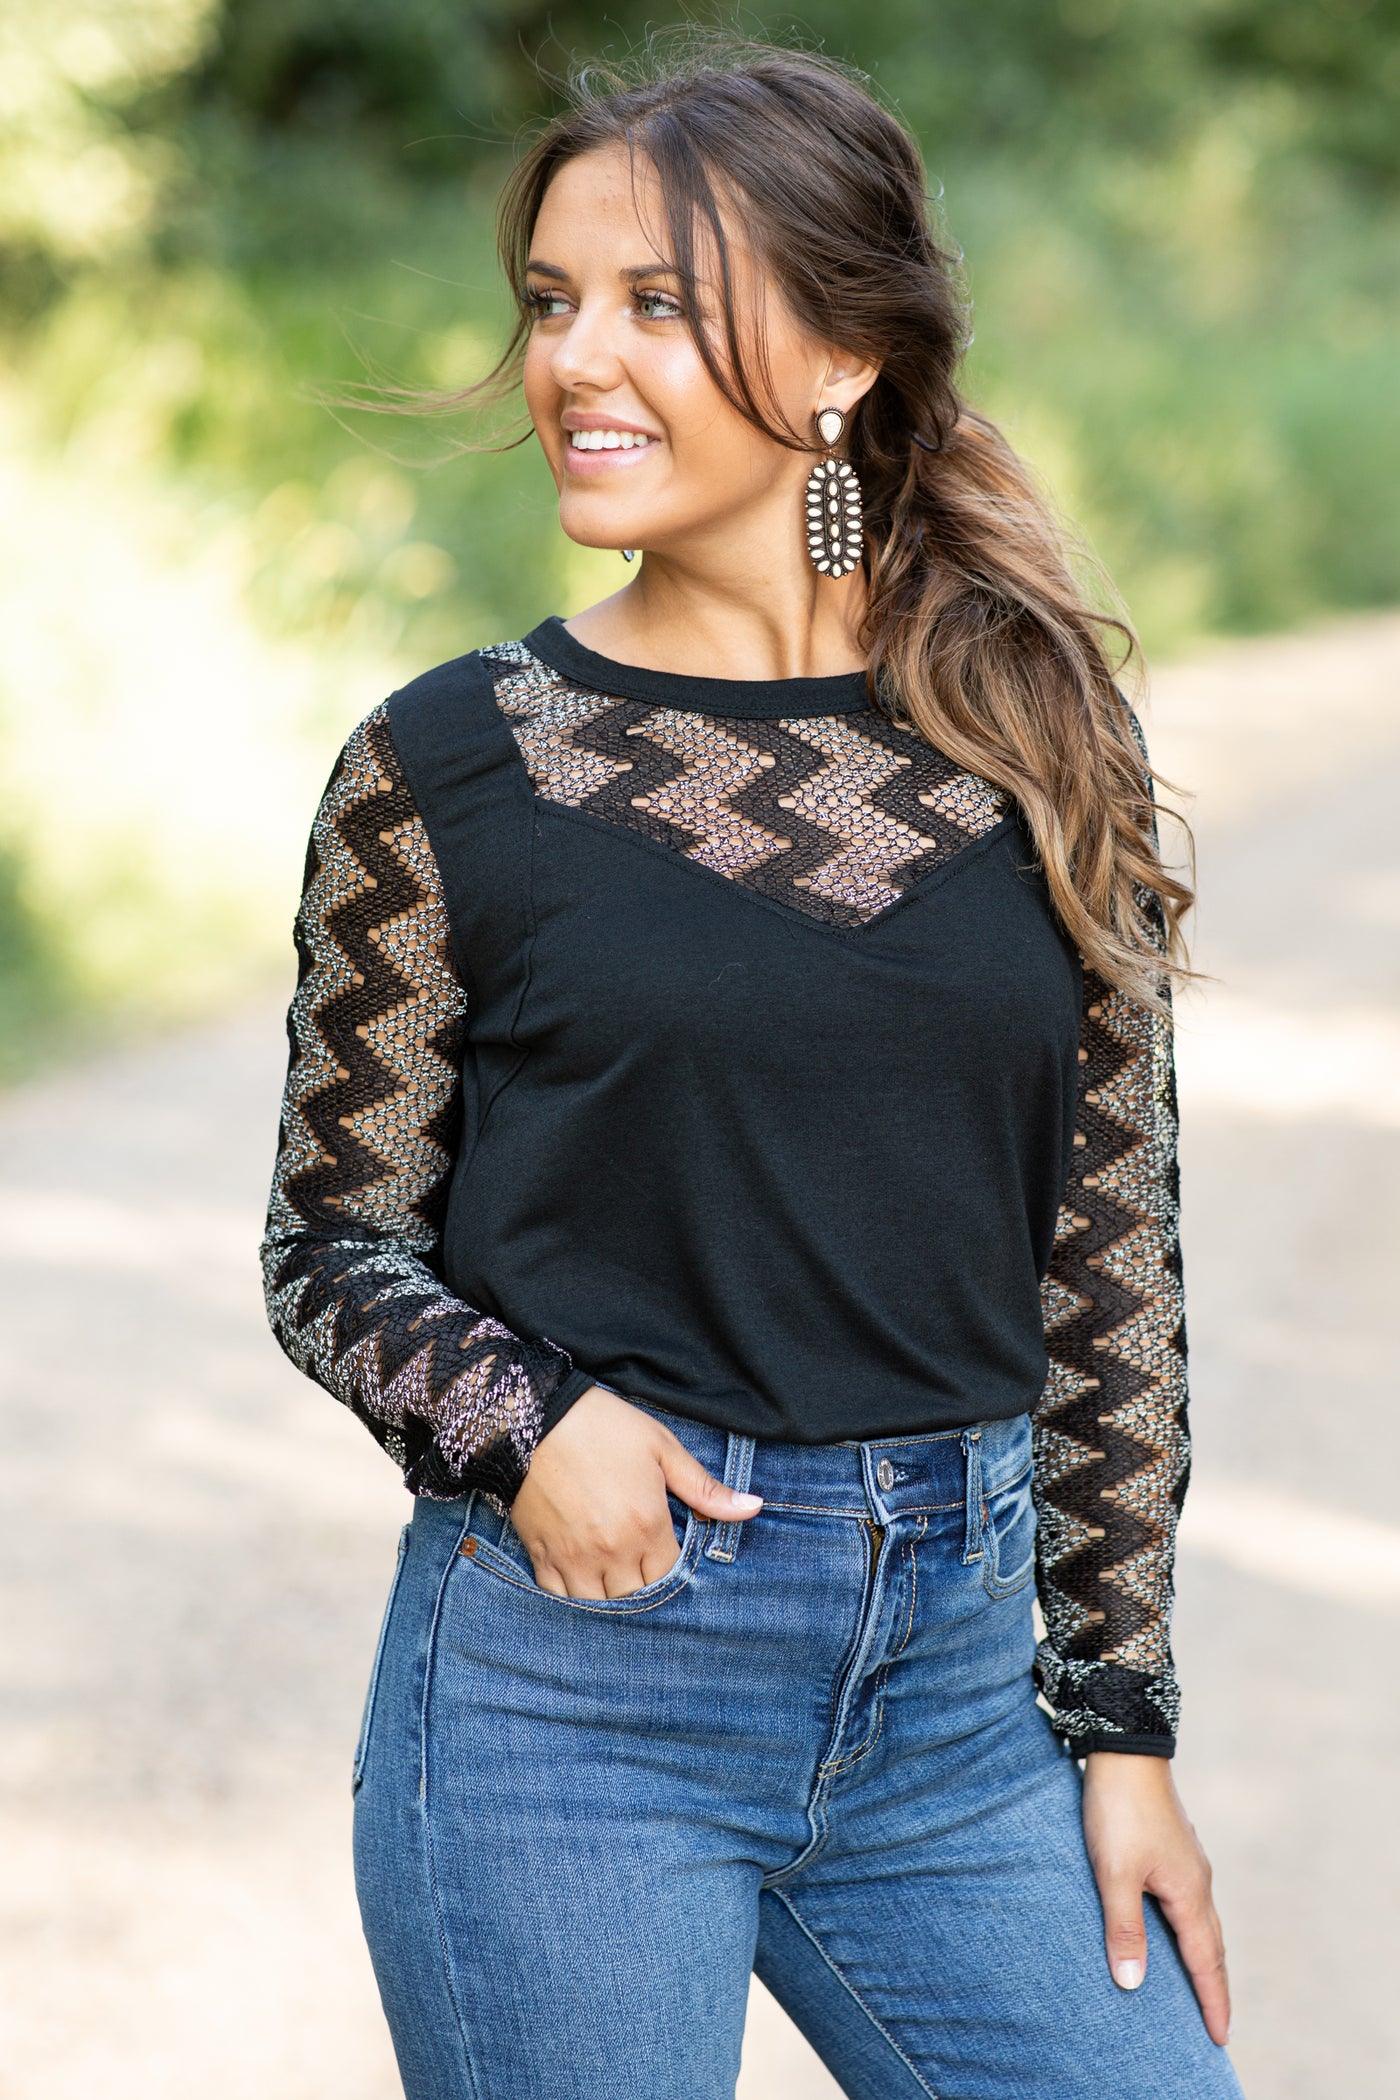 Black and Off White Top With Chevron Sleeves